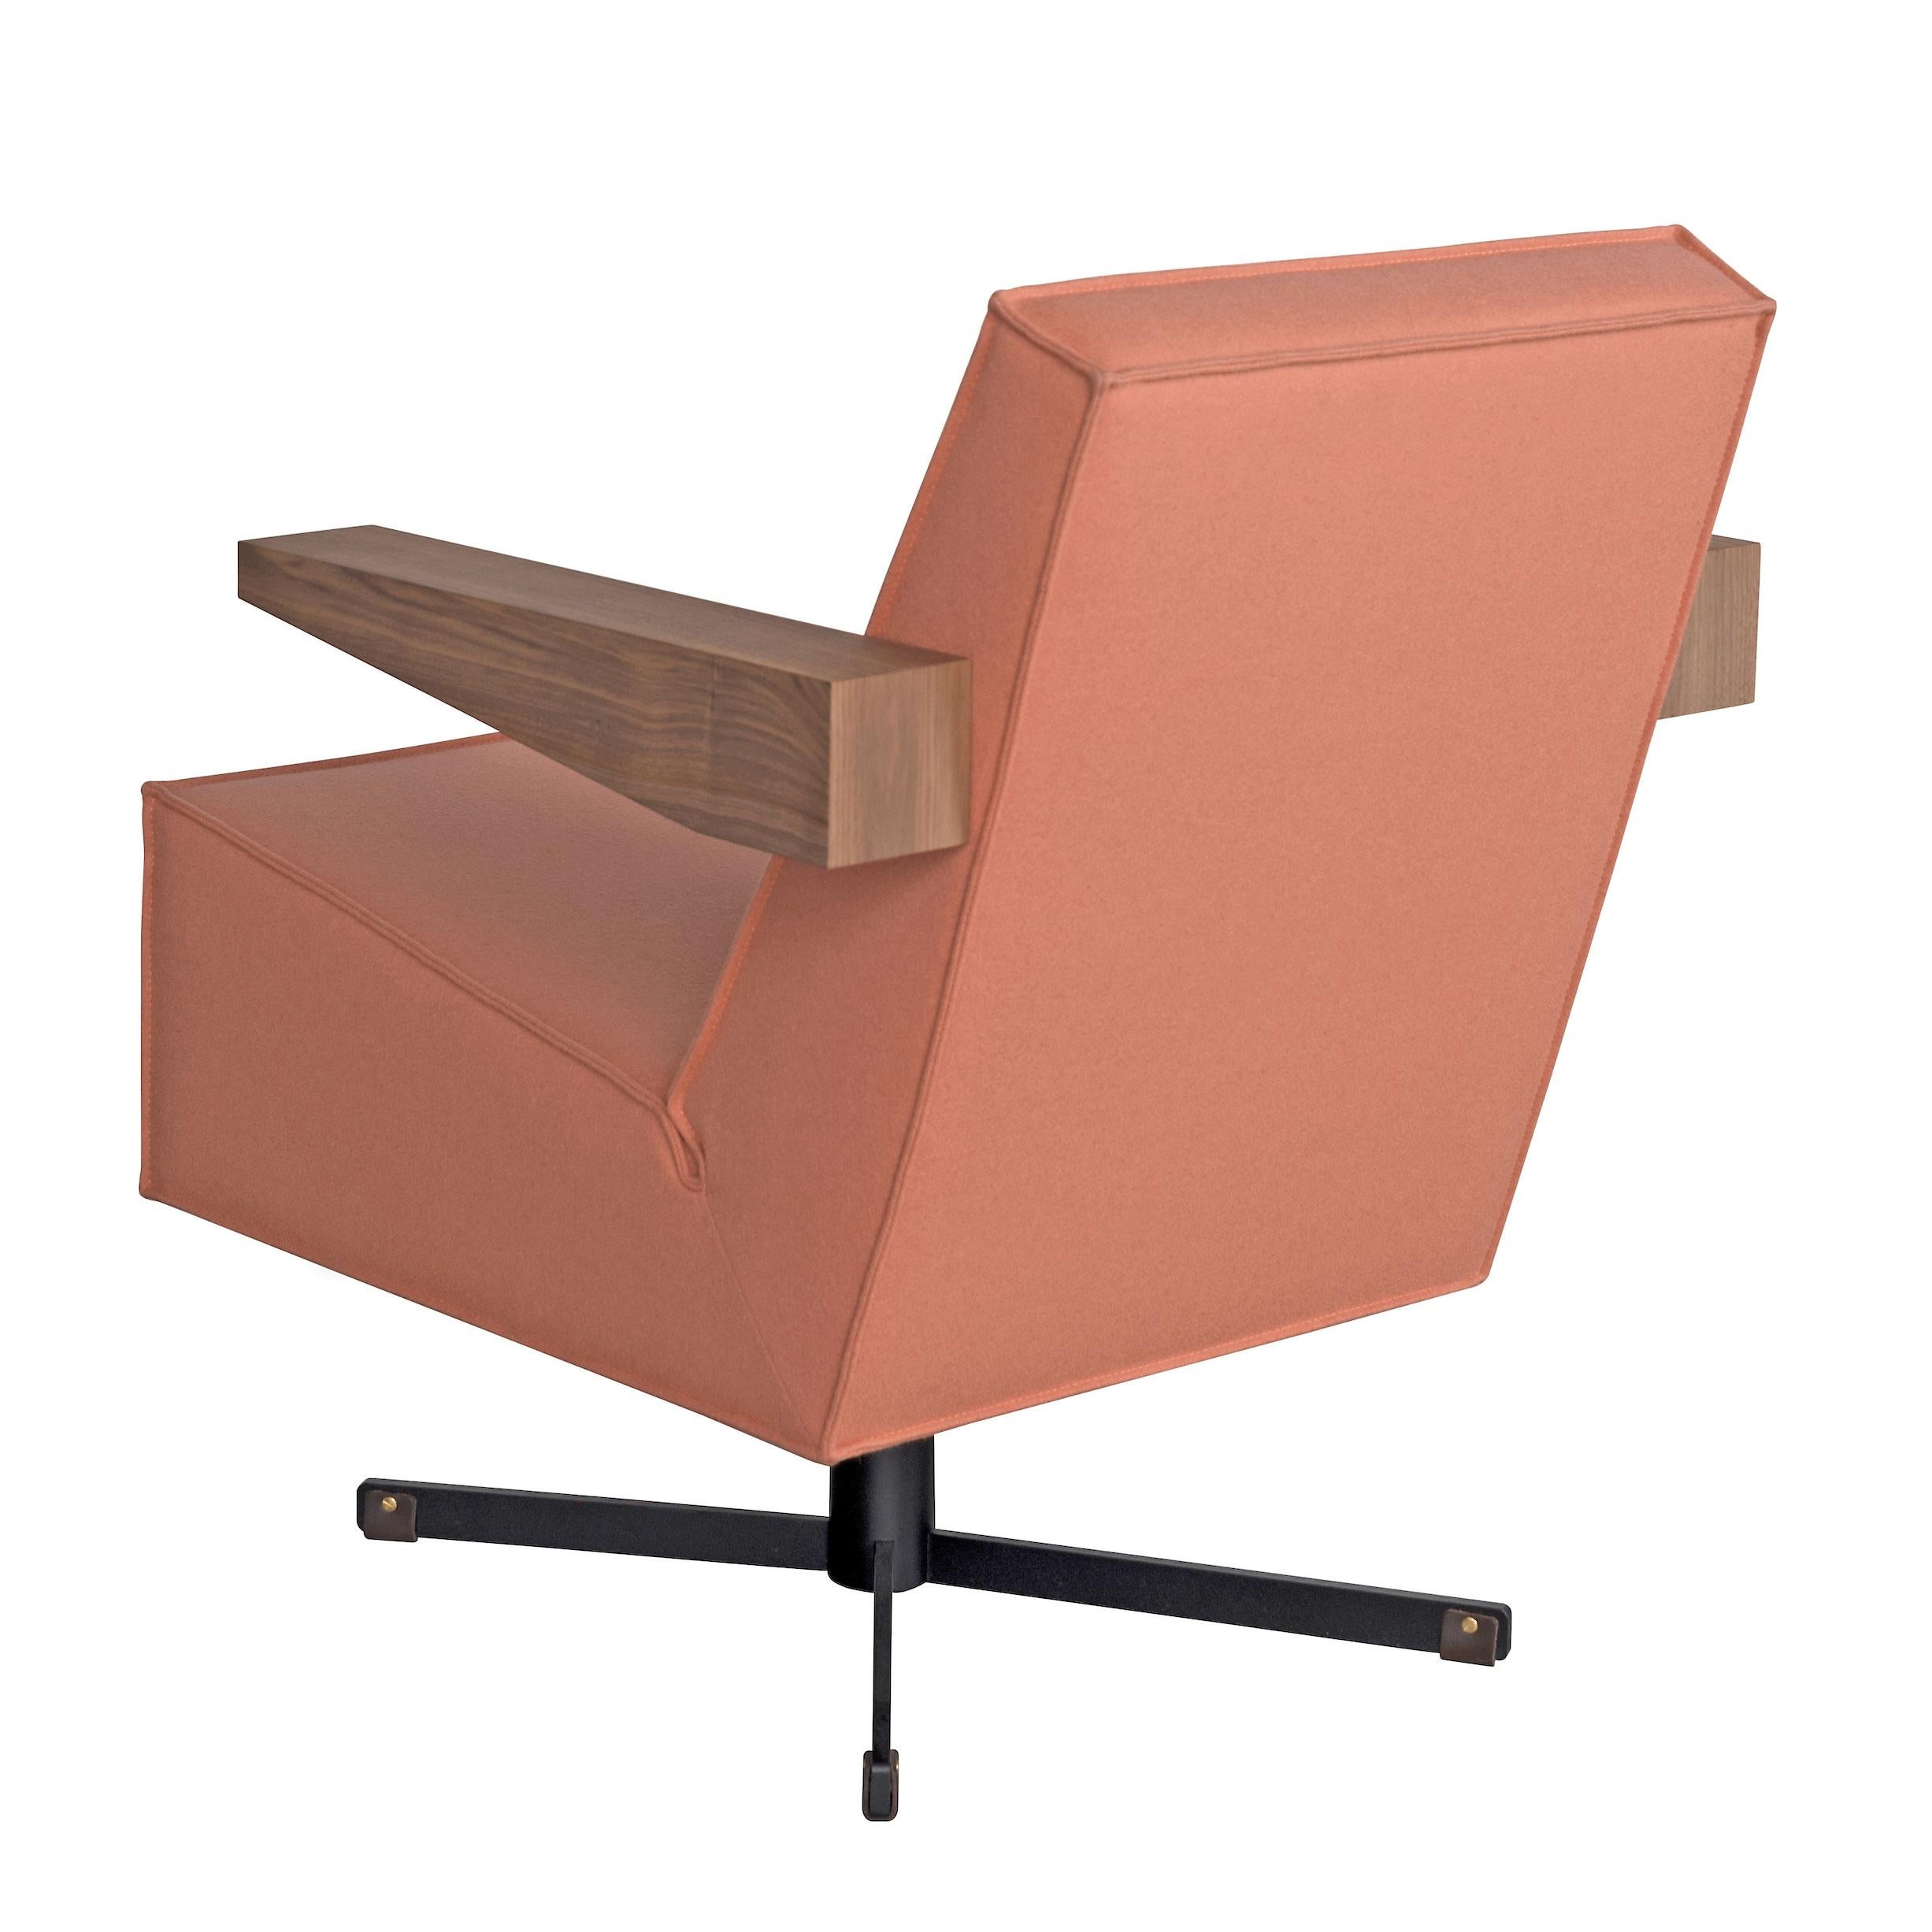 The Press Room Chair was designed in 1958 by Gerrit Rietveld for the UNESCO building in Paris. Rietveld designed the armchair as a comfortable lounge chair for journalists at the reading table in the pressroom. However, due to the tight budget and